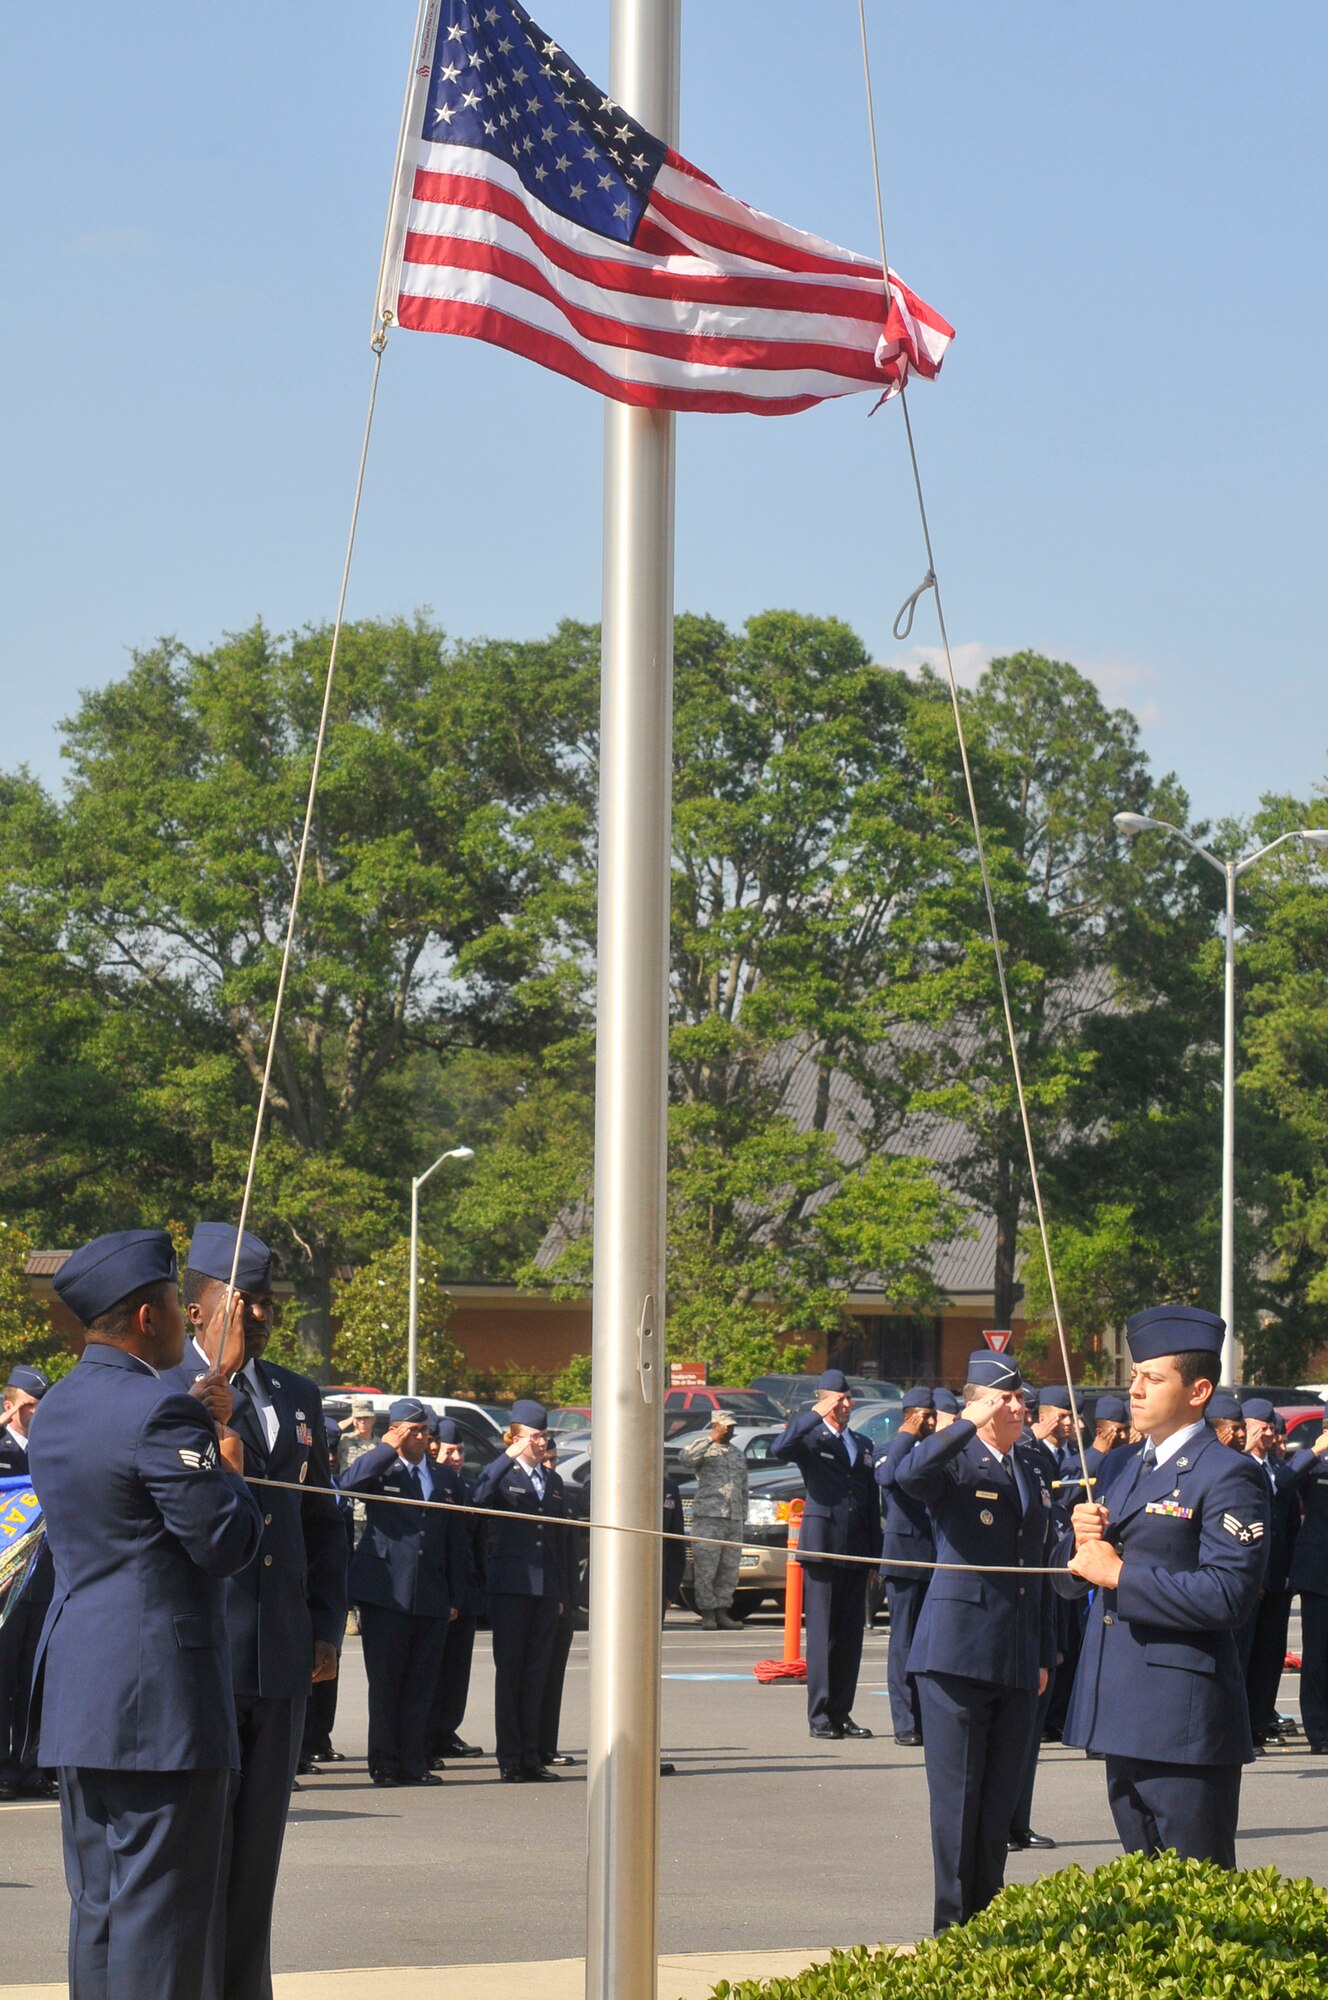 L-R, Senior Airman Terrell Ferguson, Staff Sgt. Nicholas Jackson and Senior Airman Mario Benavidez attend to lowering the flag during a  Memorial Day Retreat Ceremony Wed. The retreat included representatives of every organization on base. (U. S. Air Force photo by Sue Sapp)